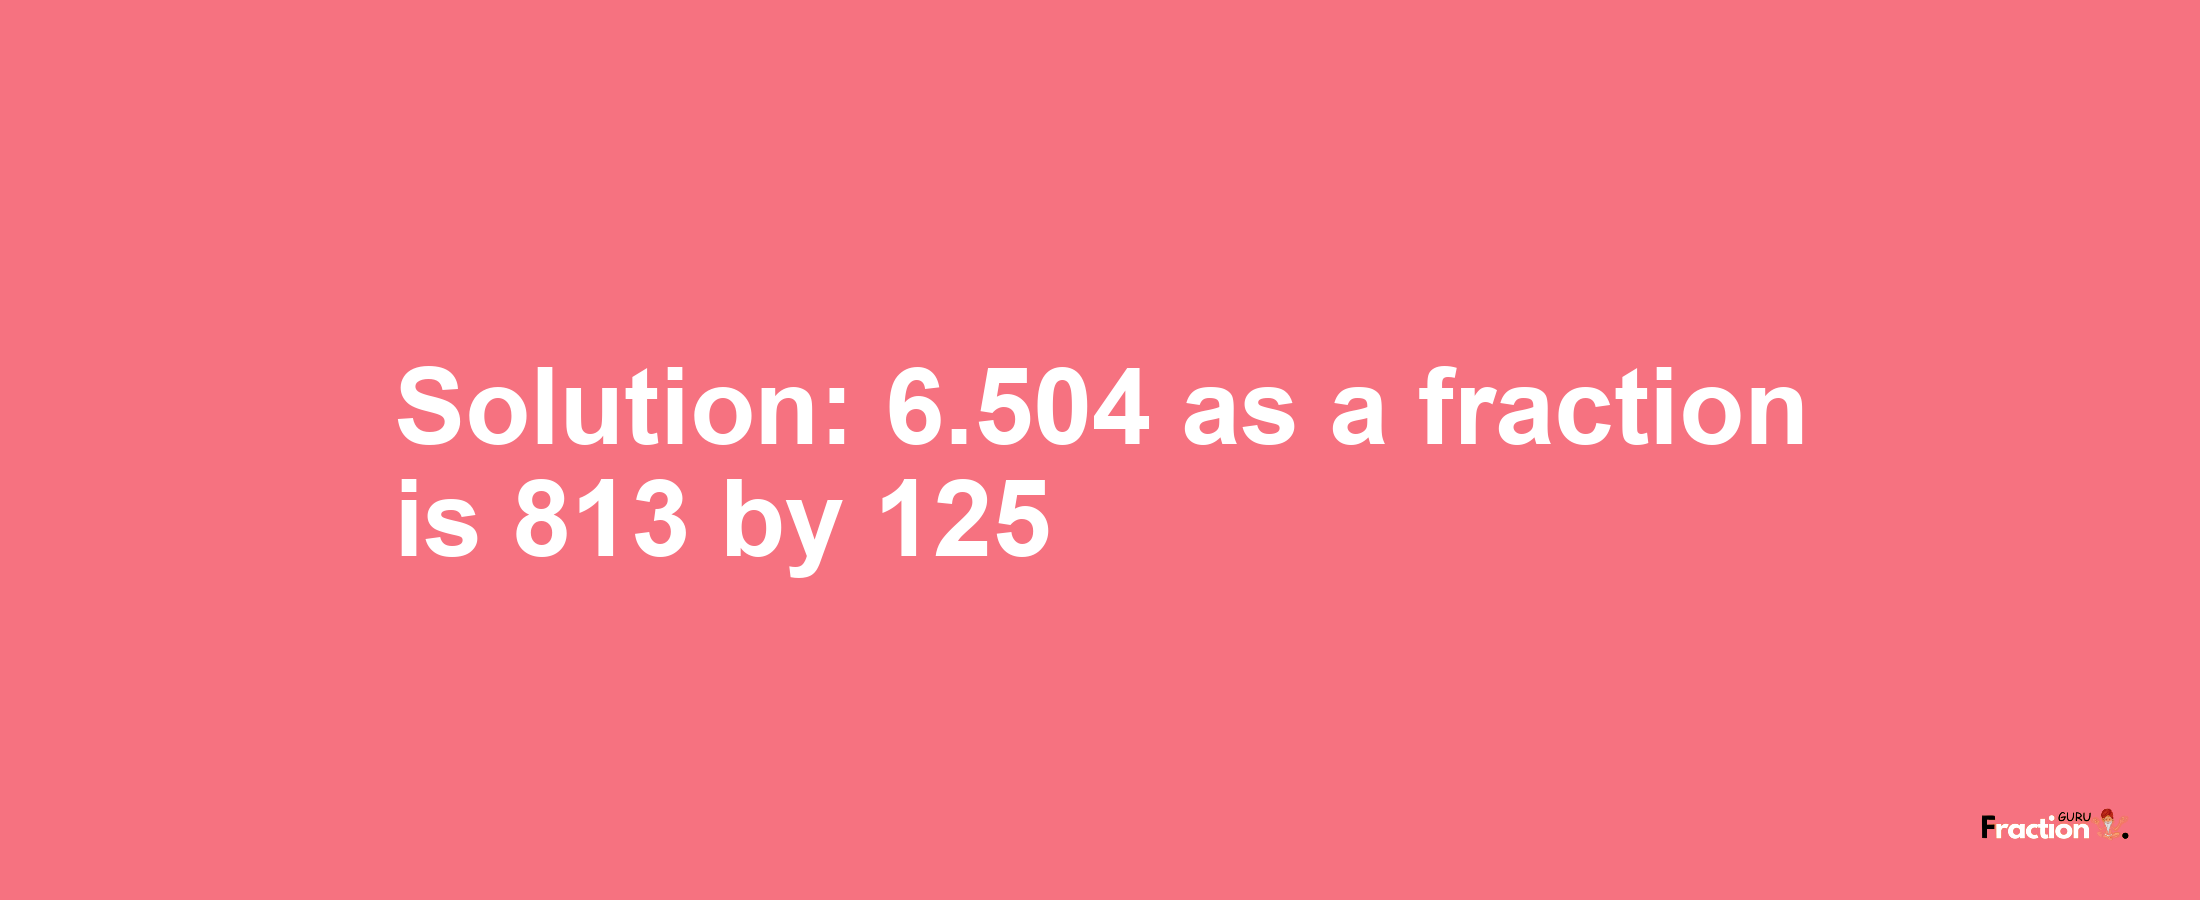 Solution:6.504 as a fraction is 813/125